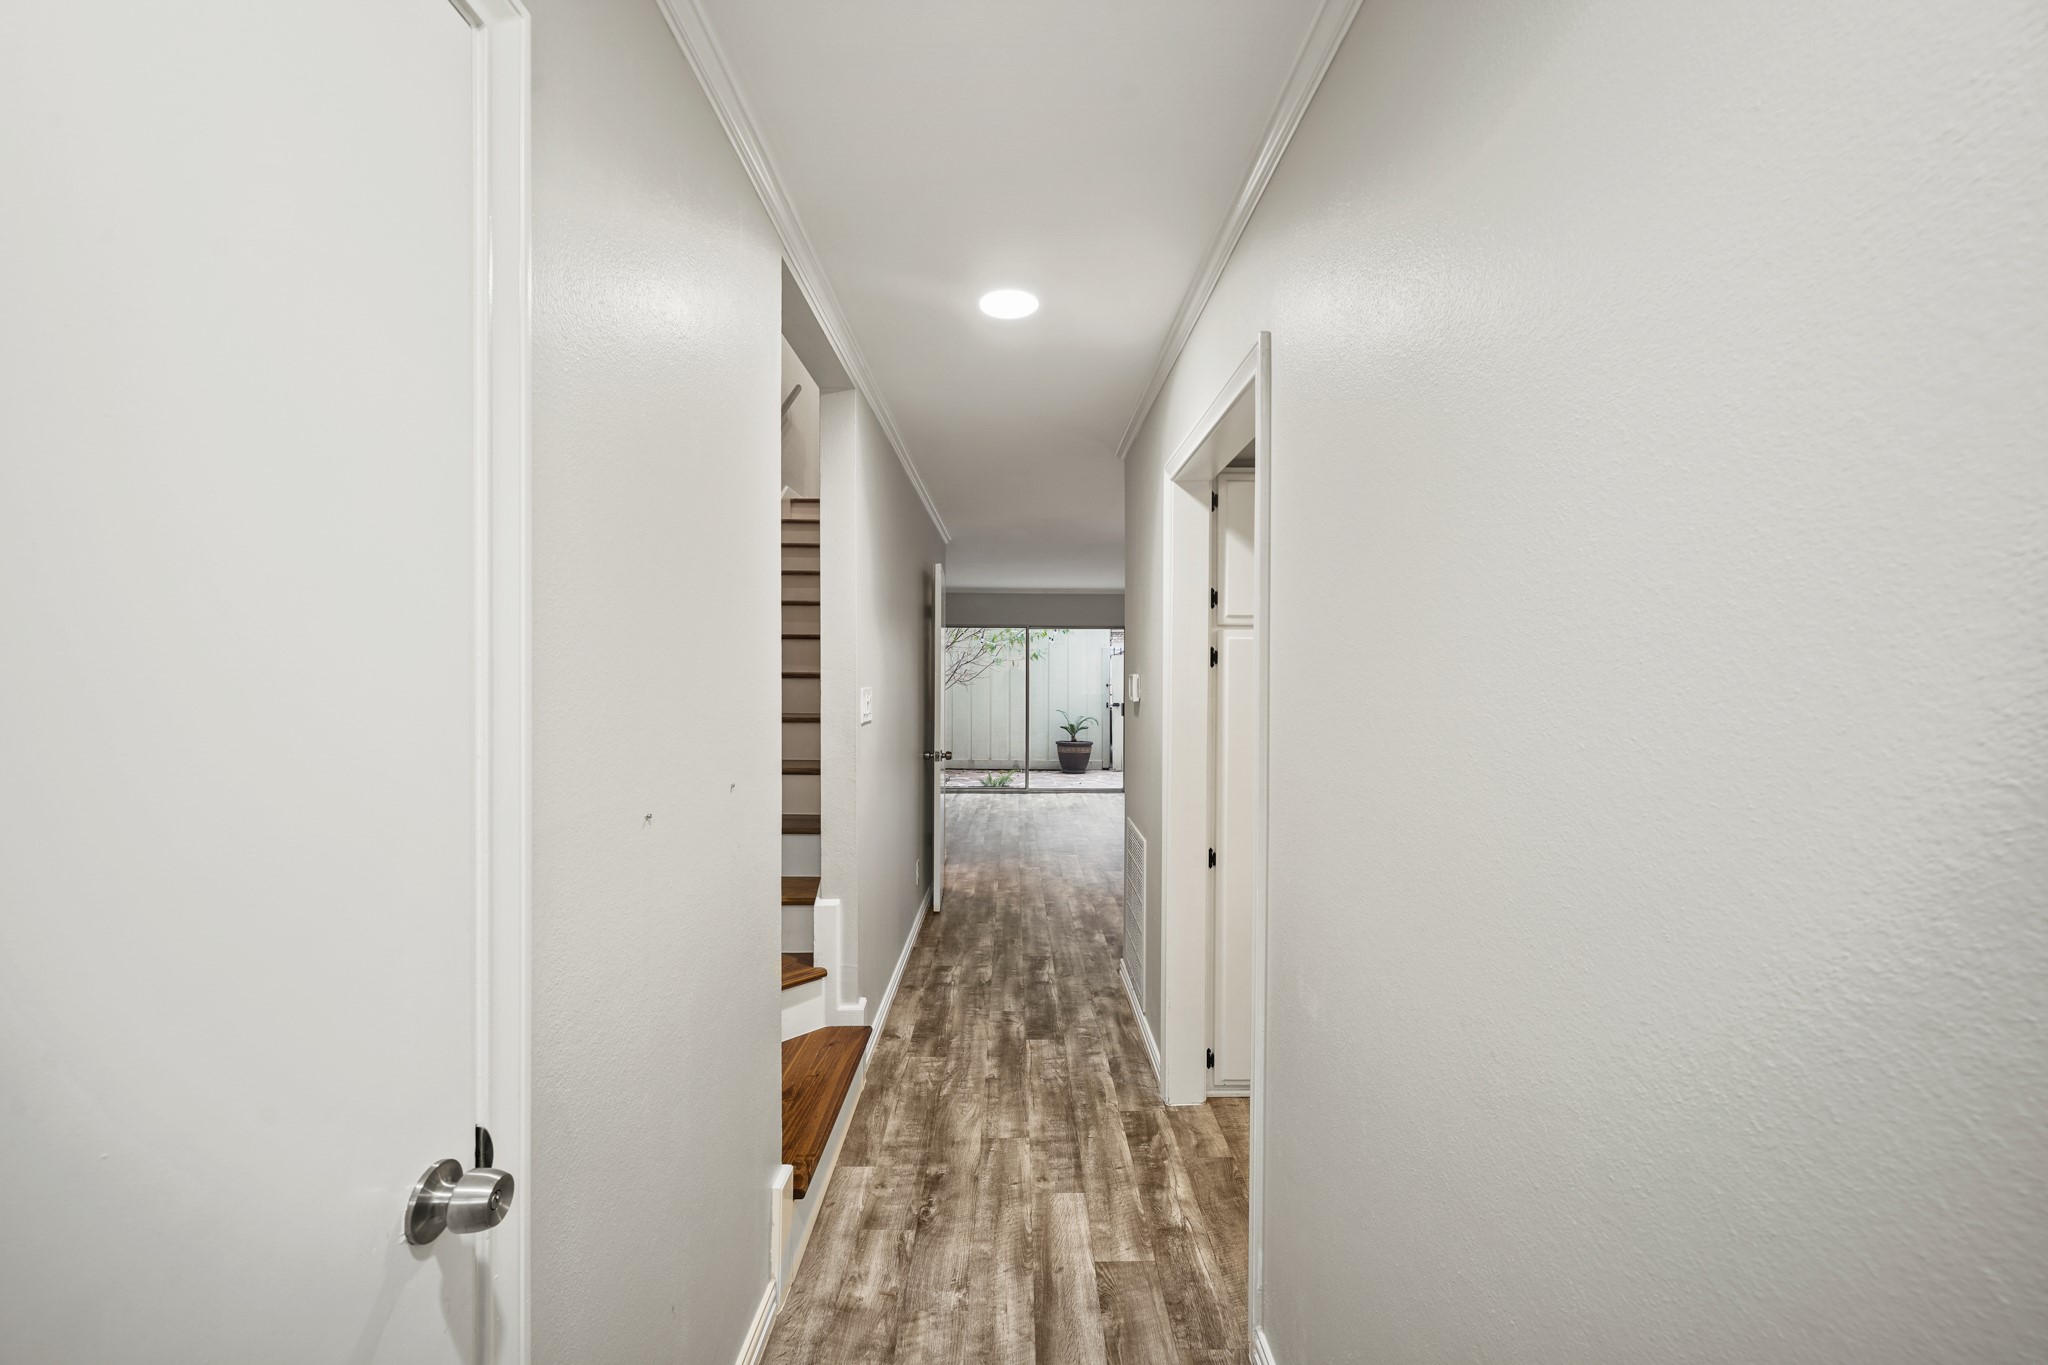 Right when you open the front door, you will notice the wood floors, light paint and open patio with ample light!